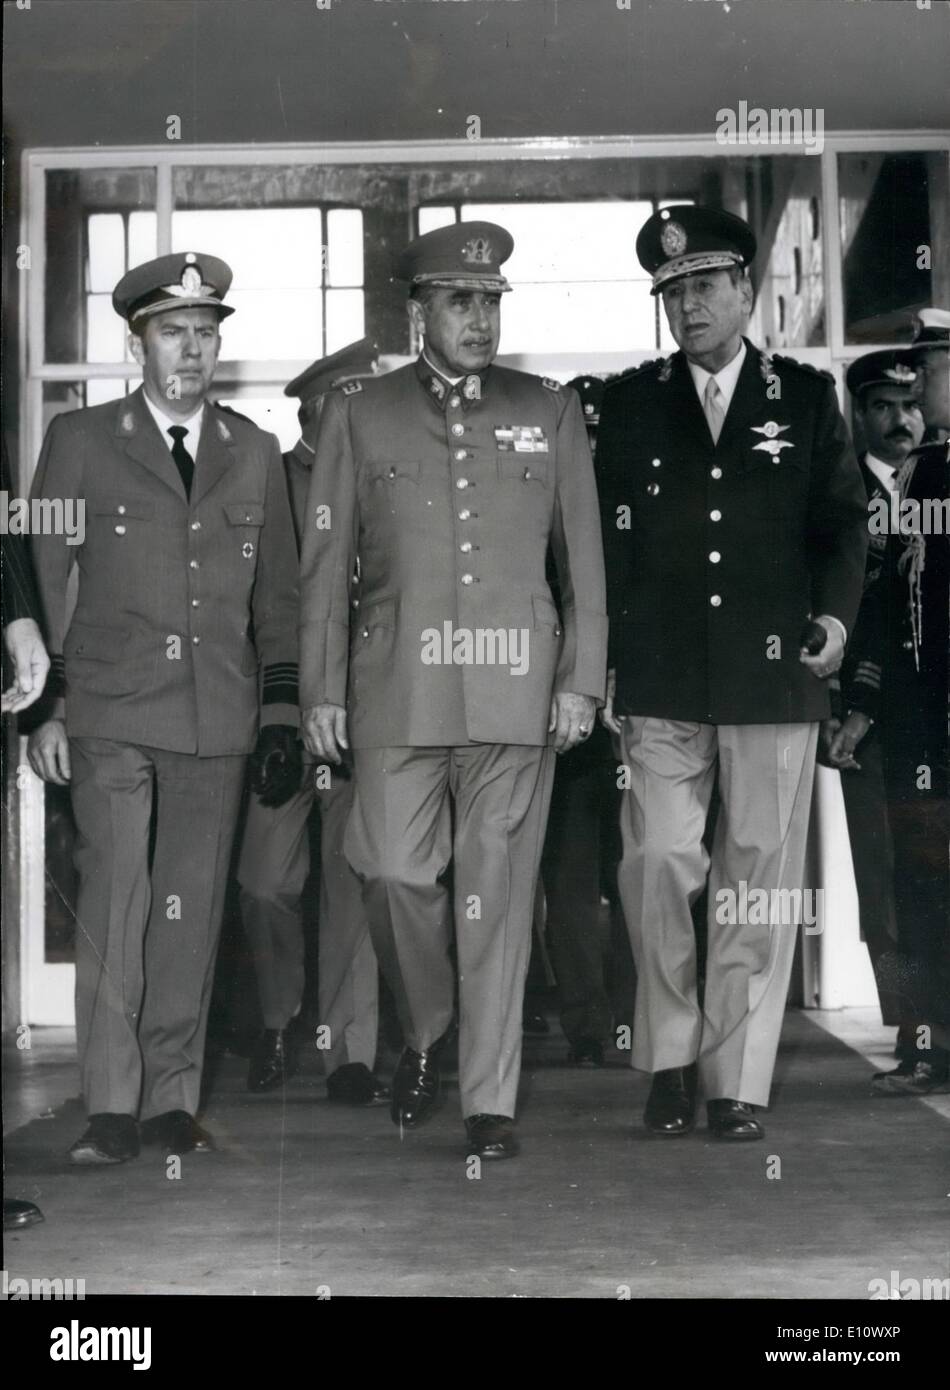 May 05, 1974 - The Presidents of Argentina and Chile together: General Augusto Pinochet, head of the military Junta of Chile visited on his first official visit to Southamerican countries, the Argentina. - Here is Argentina's president general Juan D. Peron (right) the aged President, as Moron Airport, with his chilean collegue, the ''strong man'' who ousted the marxist government. The anticomunism is spreading out among the Southamerican republica like Brazil, Uruguay, Bolivia, Chile etc. At left a chilean airforce authority who acco mpanied Pinochet. Stock Photo